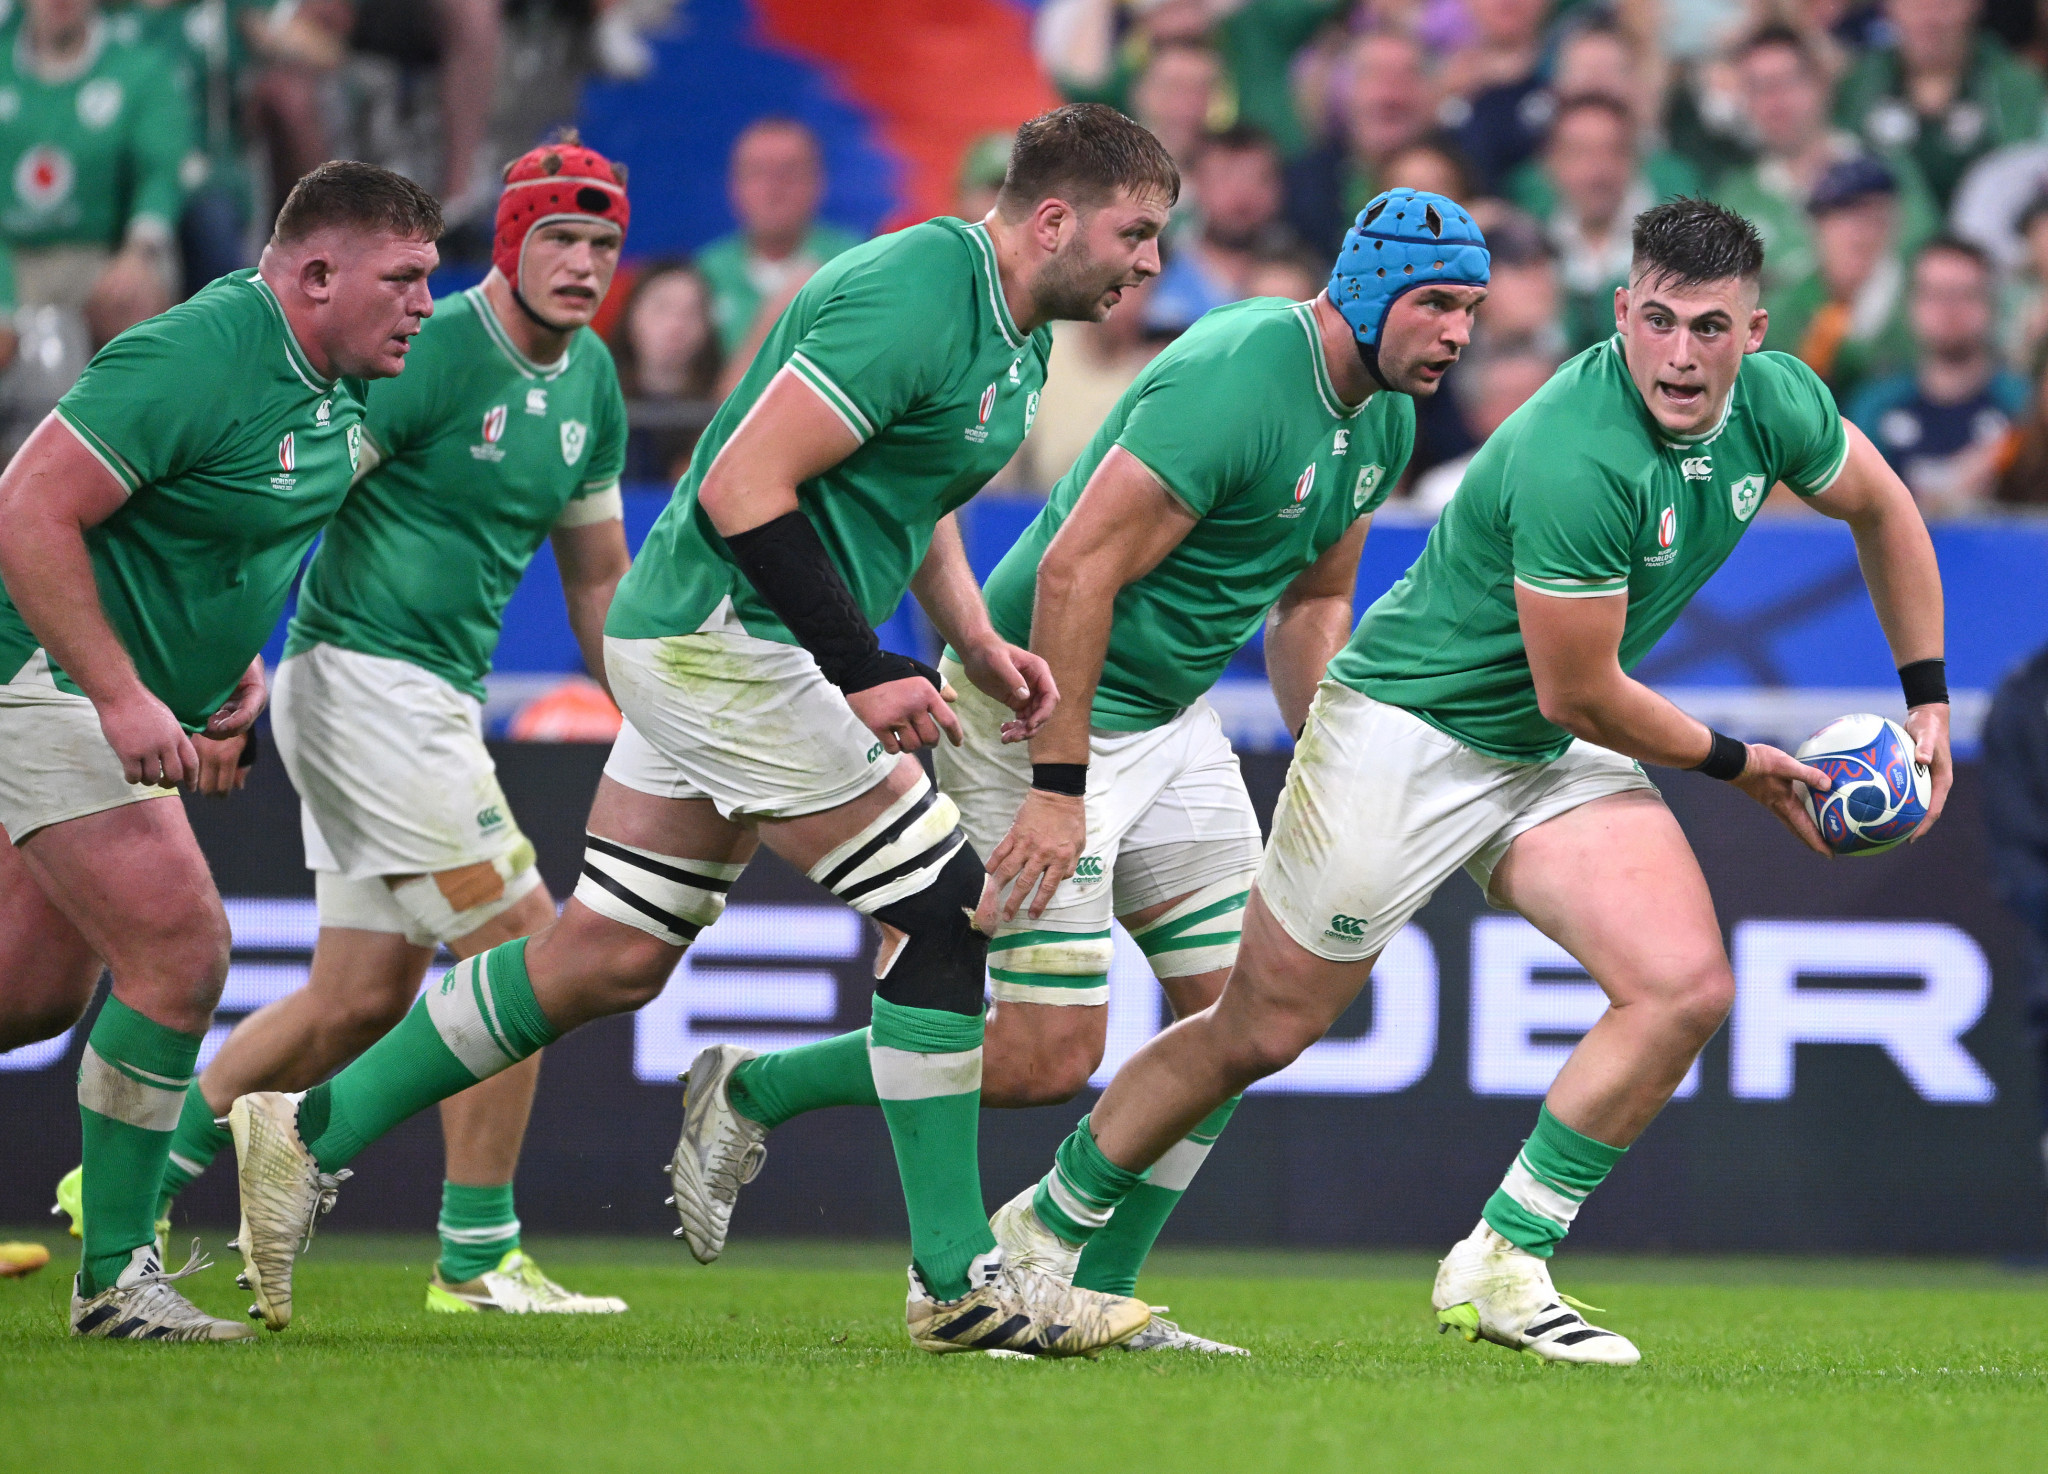 The brand value of Irish rugby has risen by 91 per cent since the last World Cup in Japan four years ago ©Getty Images